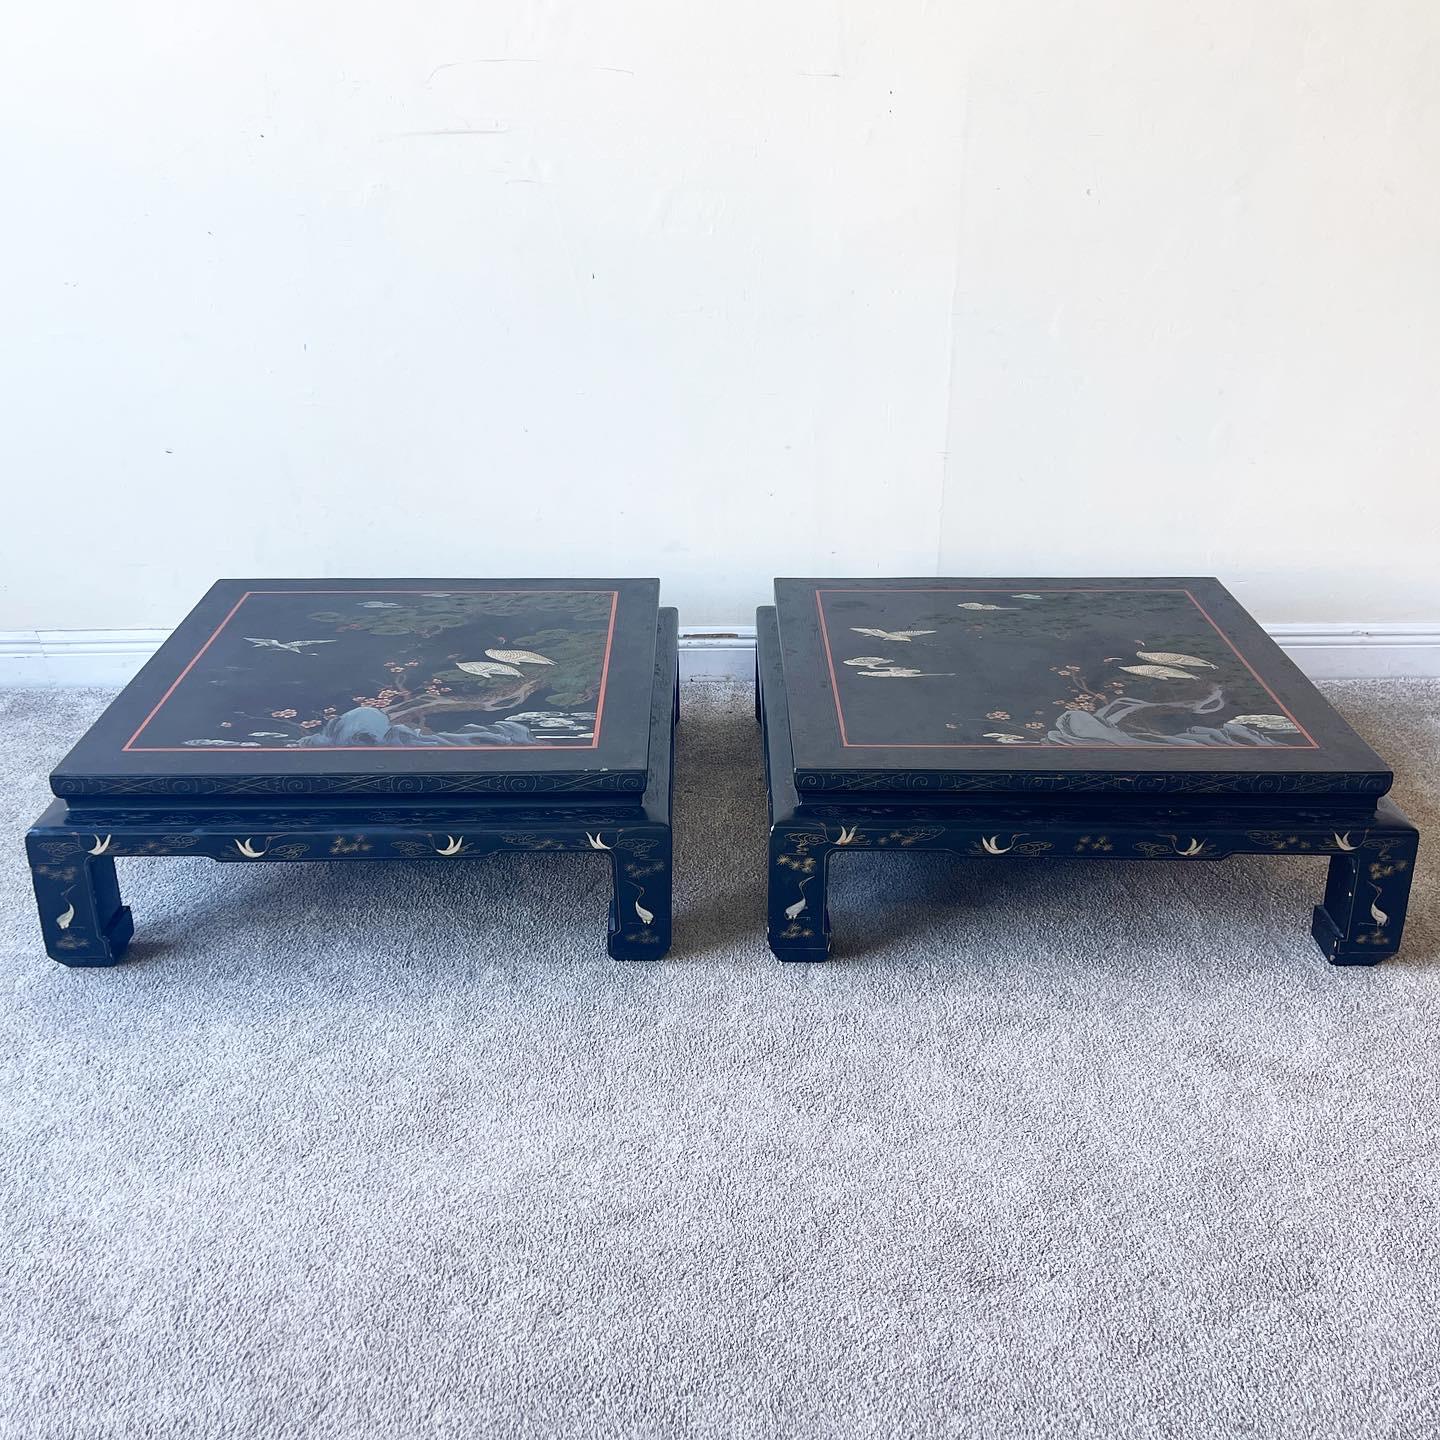 Amazing pair of black lacquered coffee tables made in Hong Kong. Stunning depictions of birds and nature hand painted onto each table.